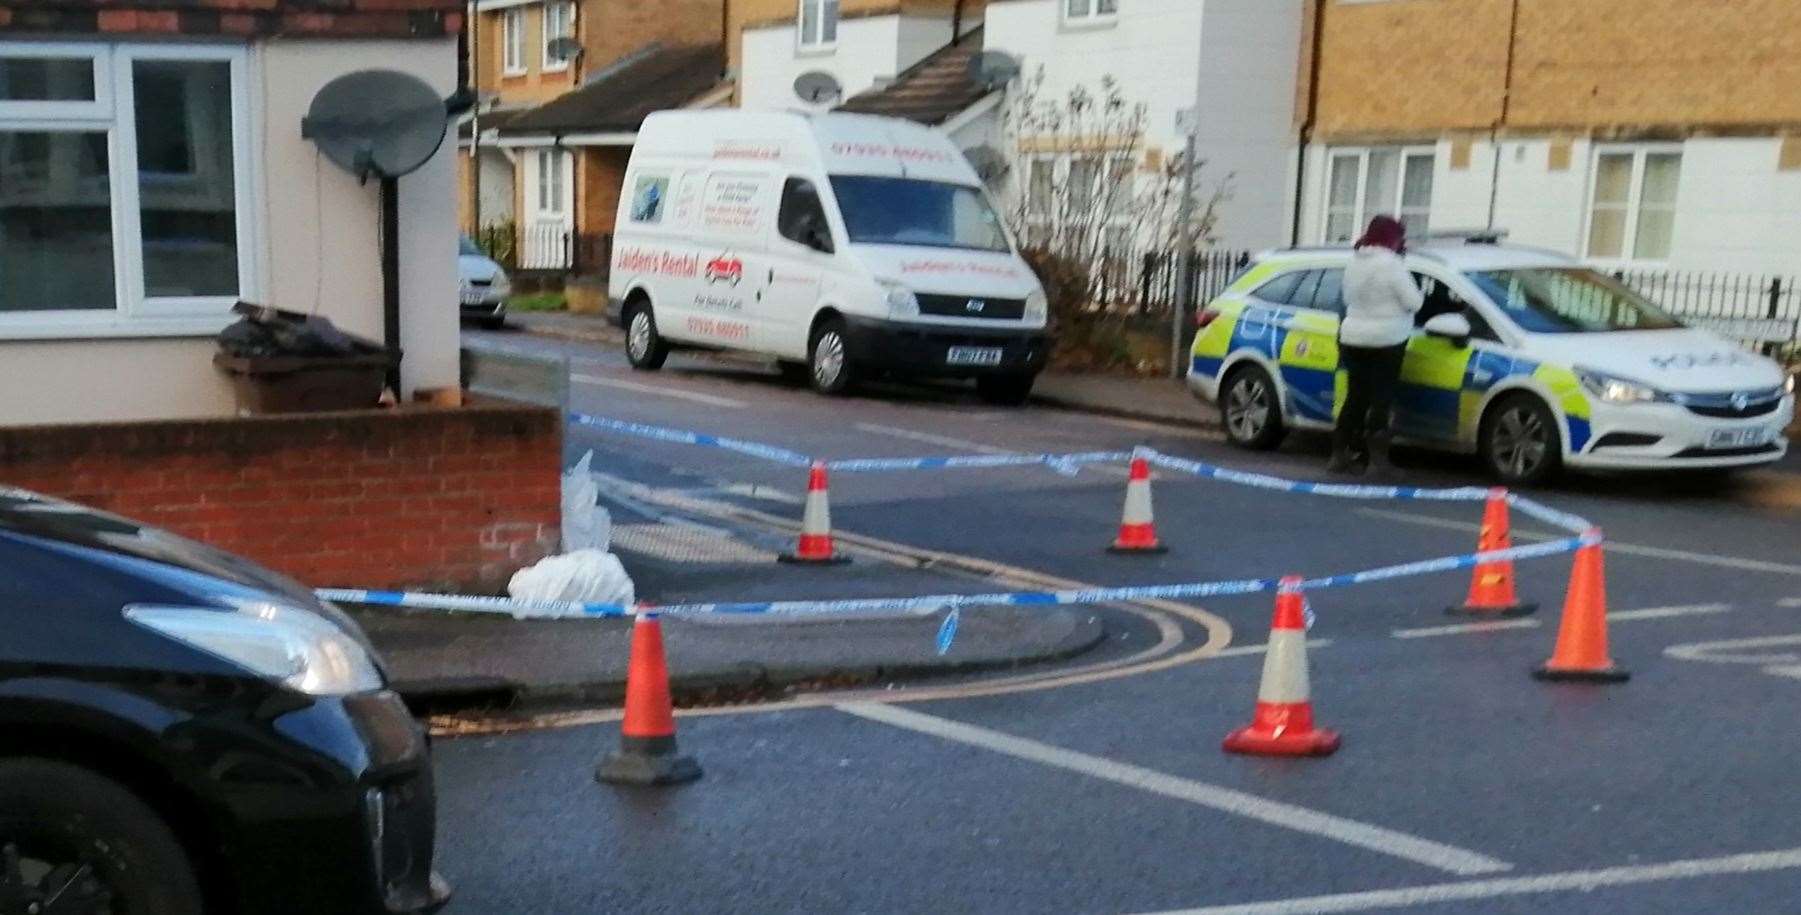 The spot in Gillingham Road, Gilingham, where the woman had collapsed